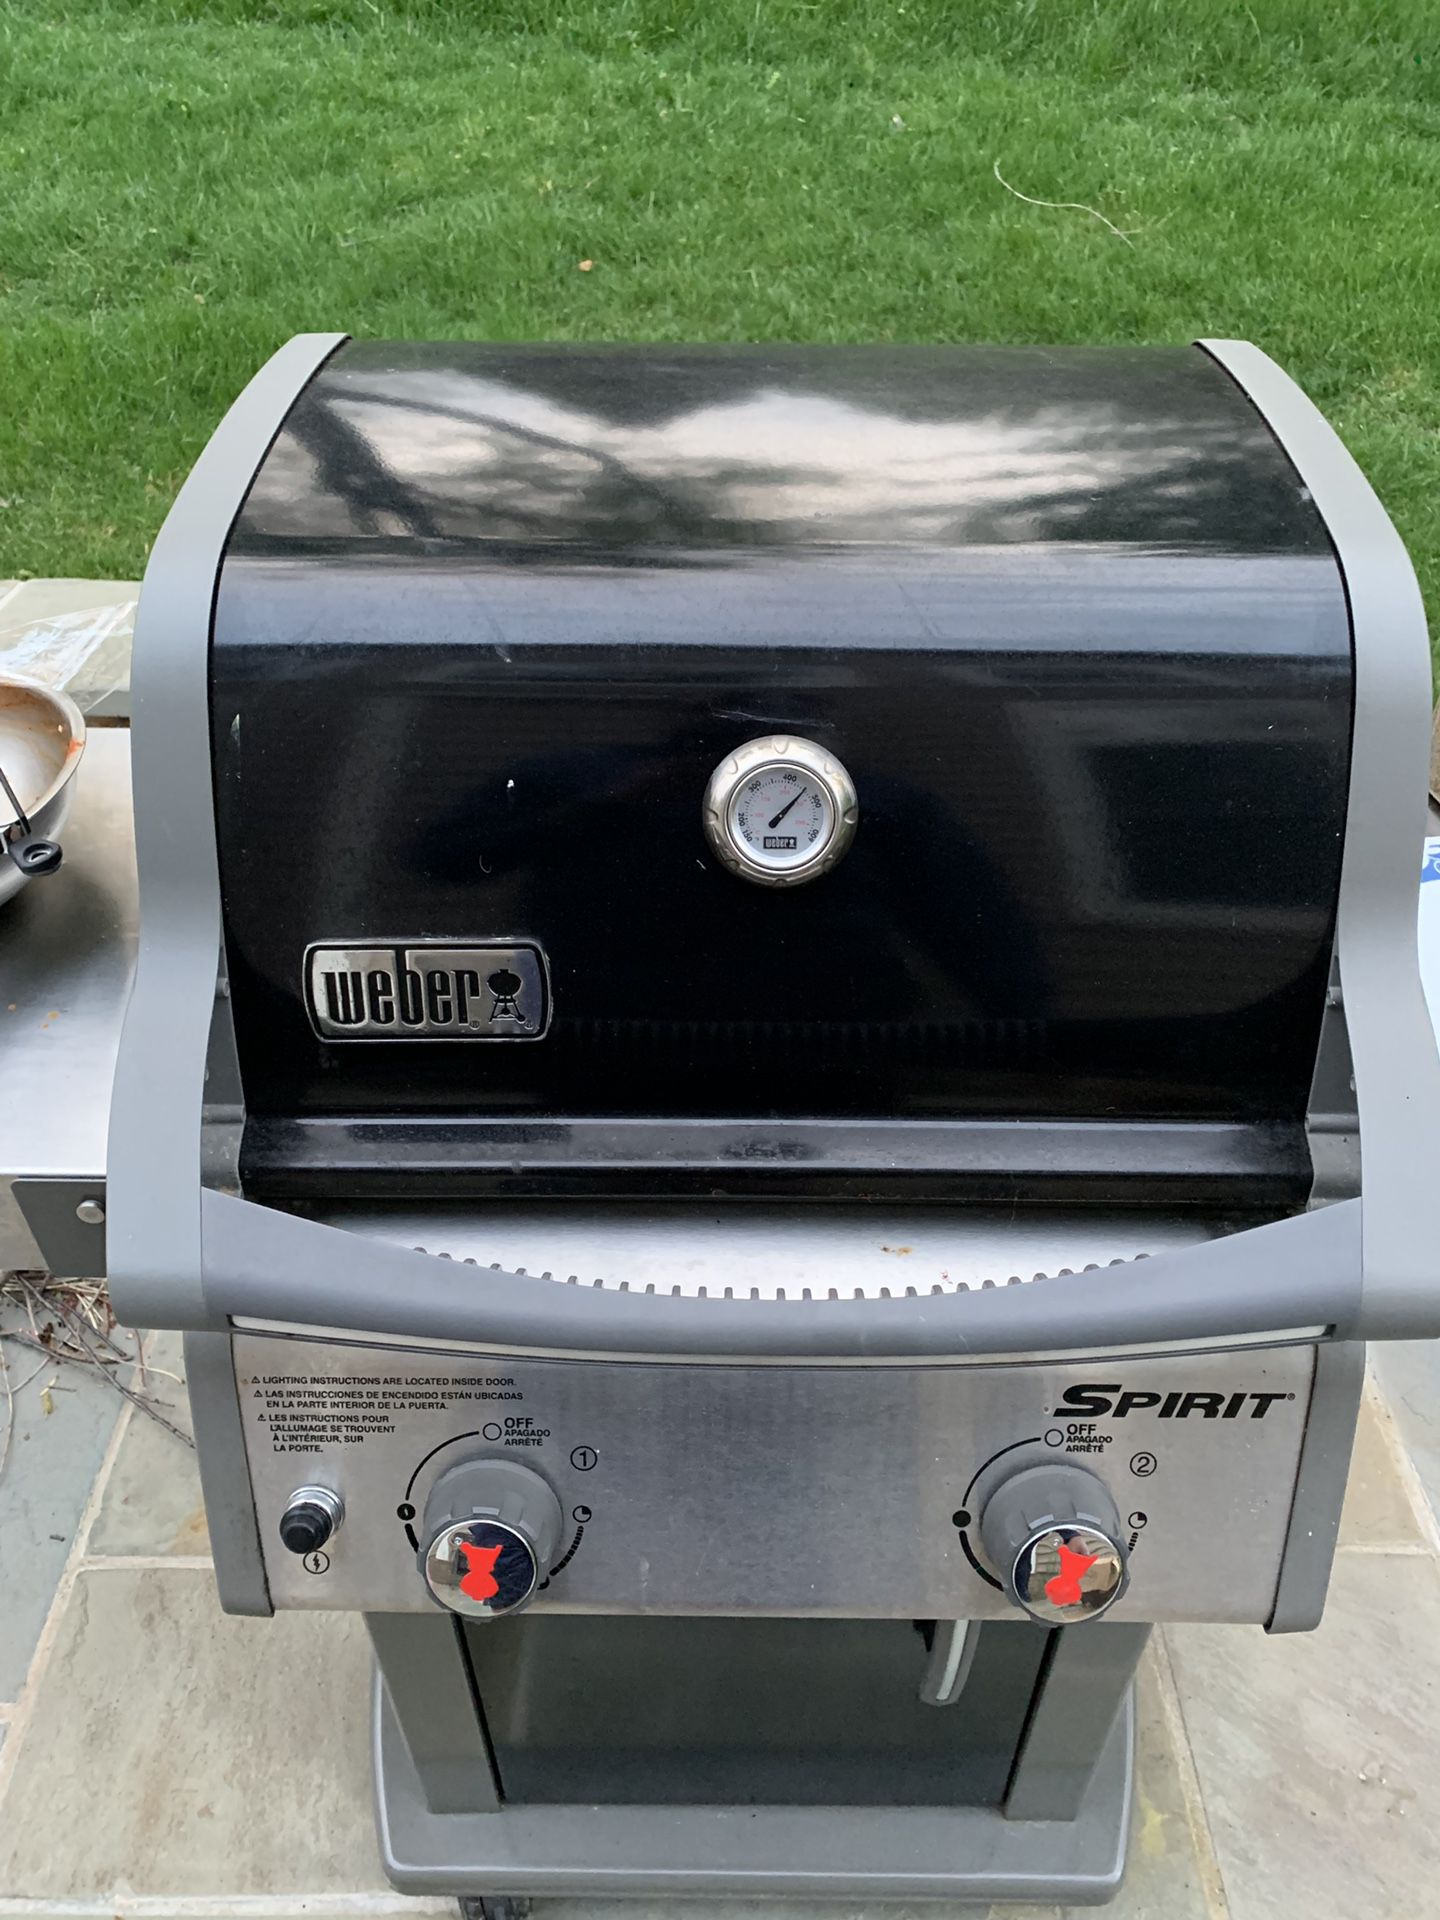 Weber E210 Grill 2 years old - Propane Grill